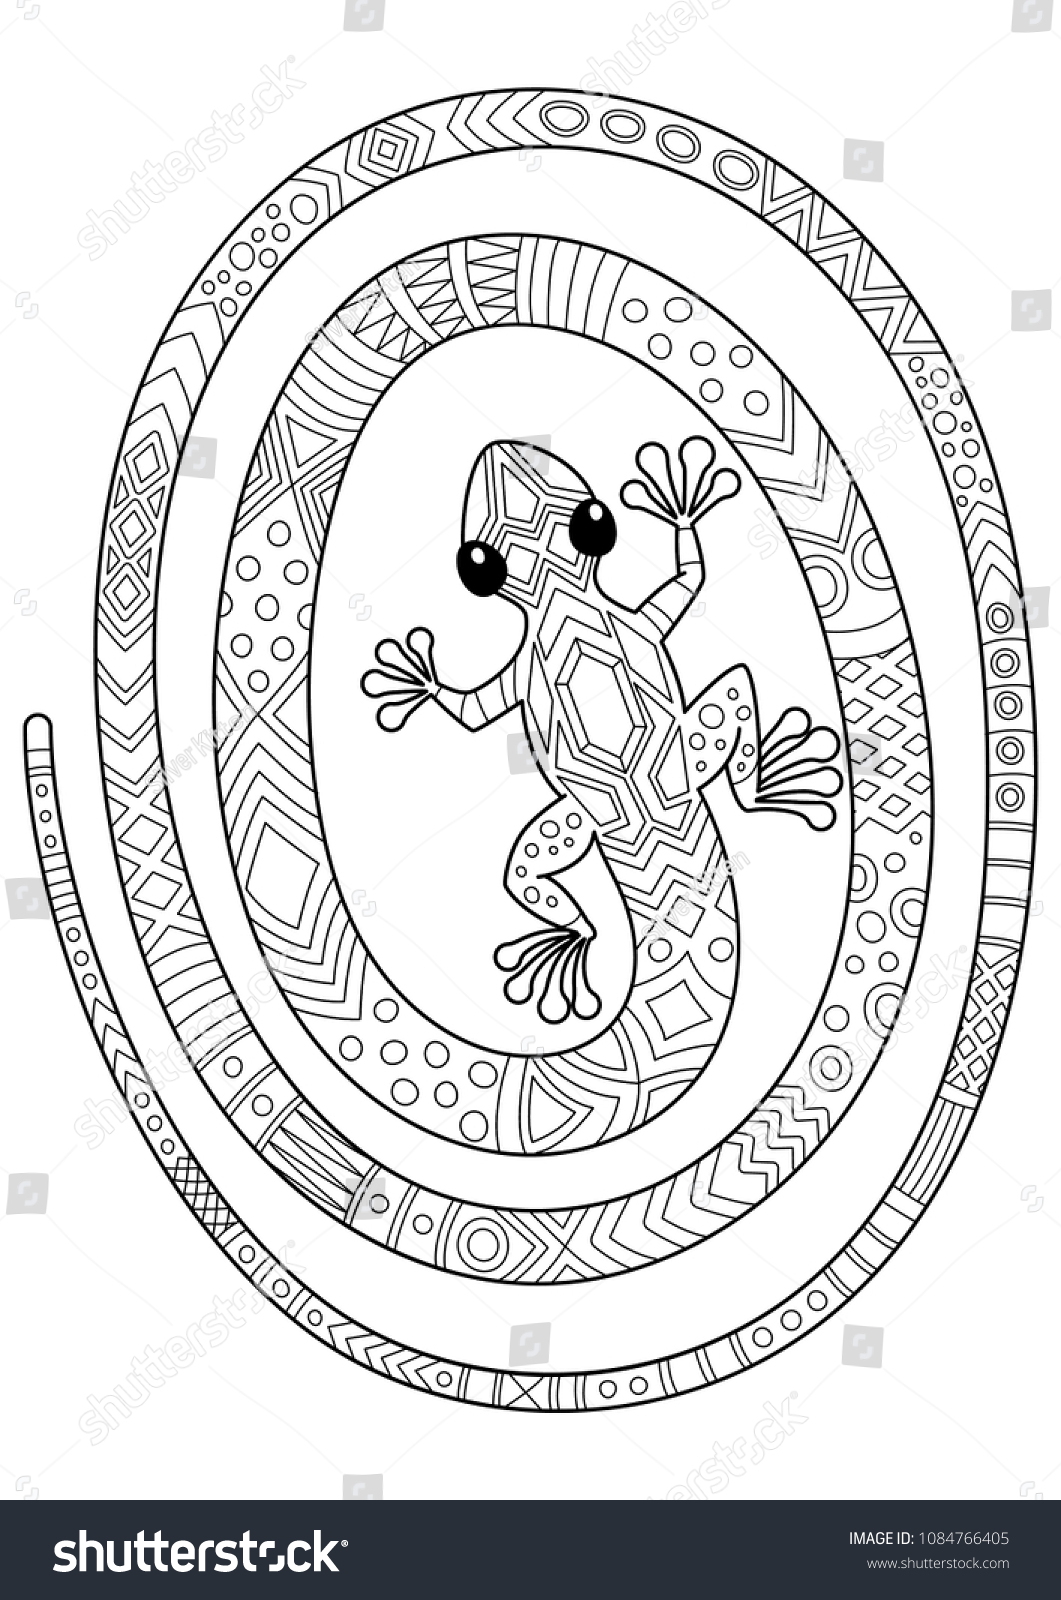 Outlined doodle antistress coloring cute lizard stock vector royalty free